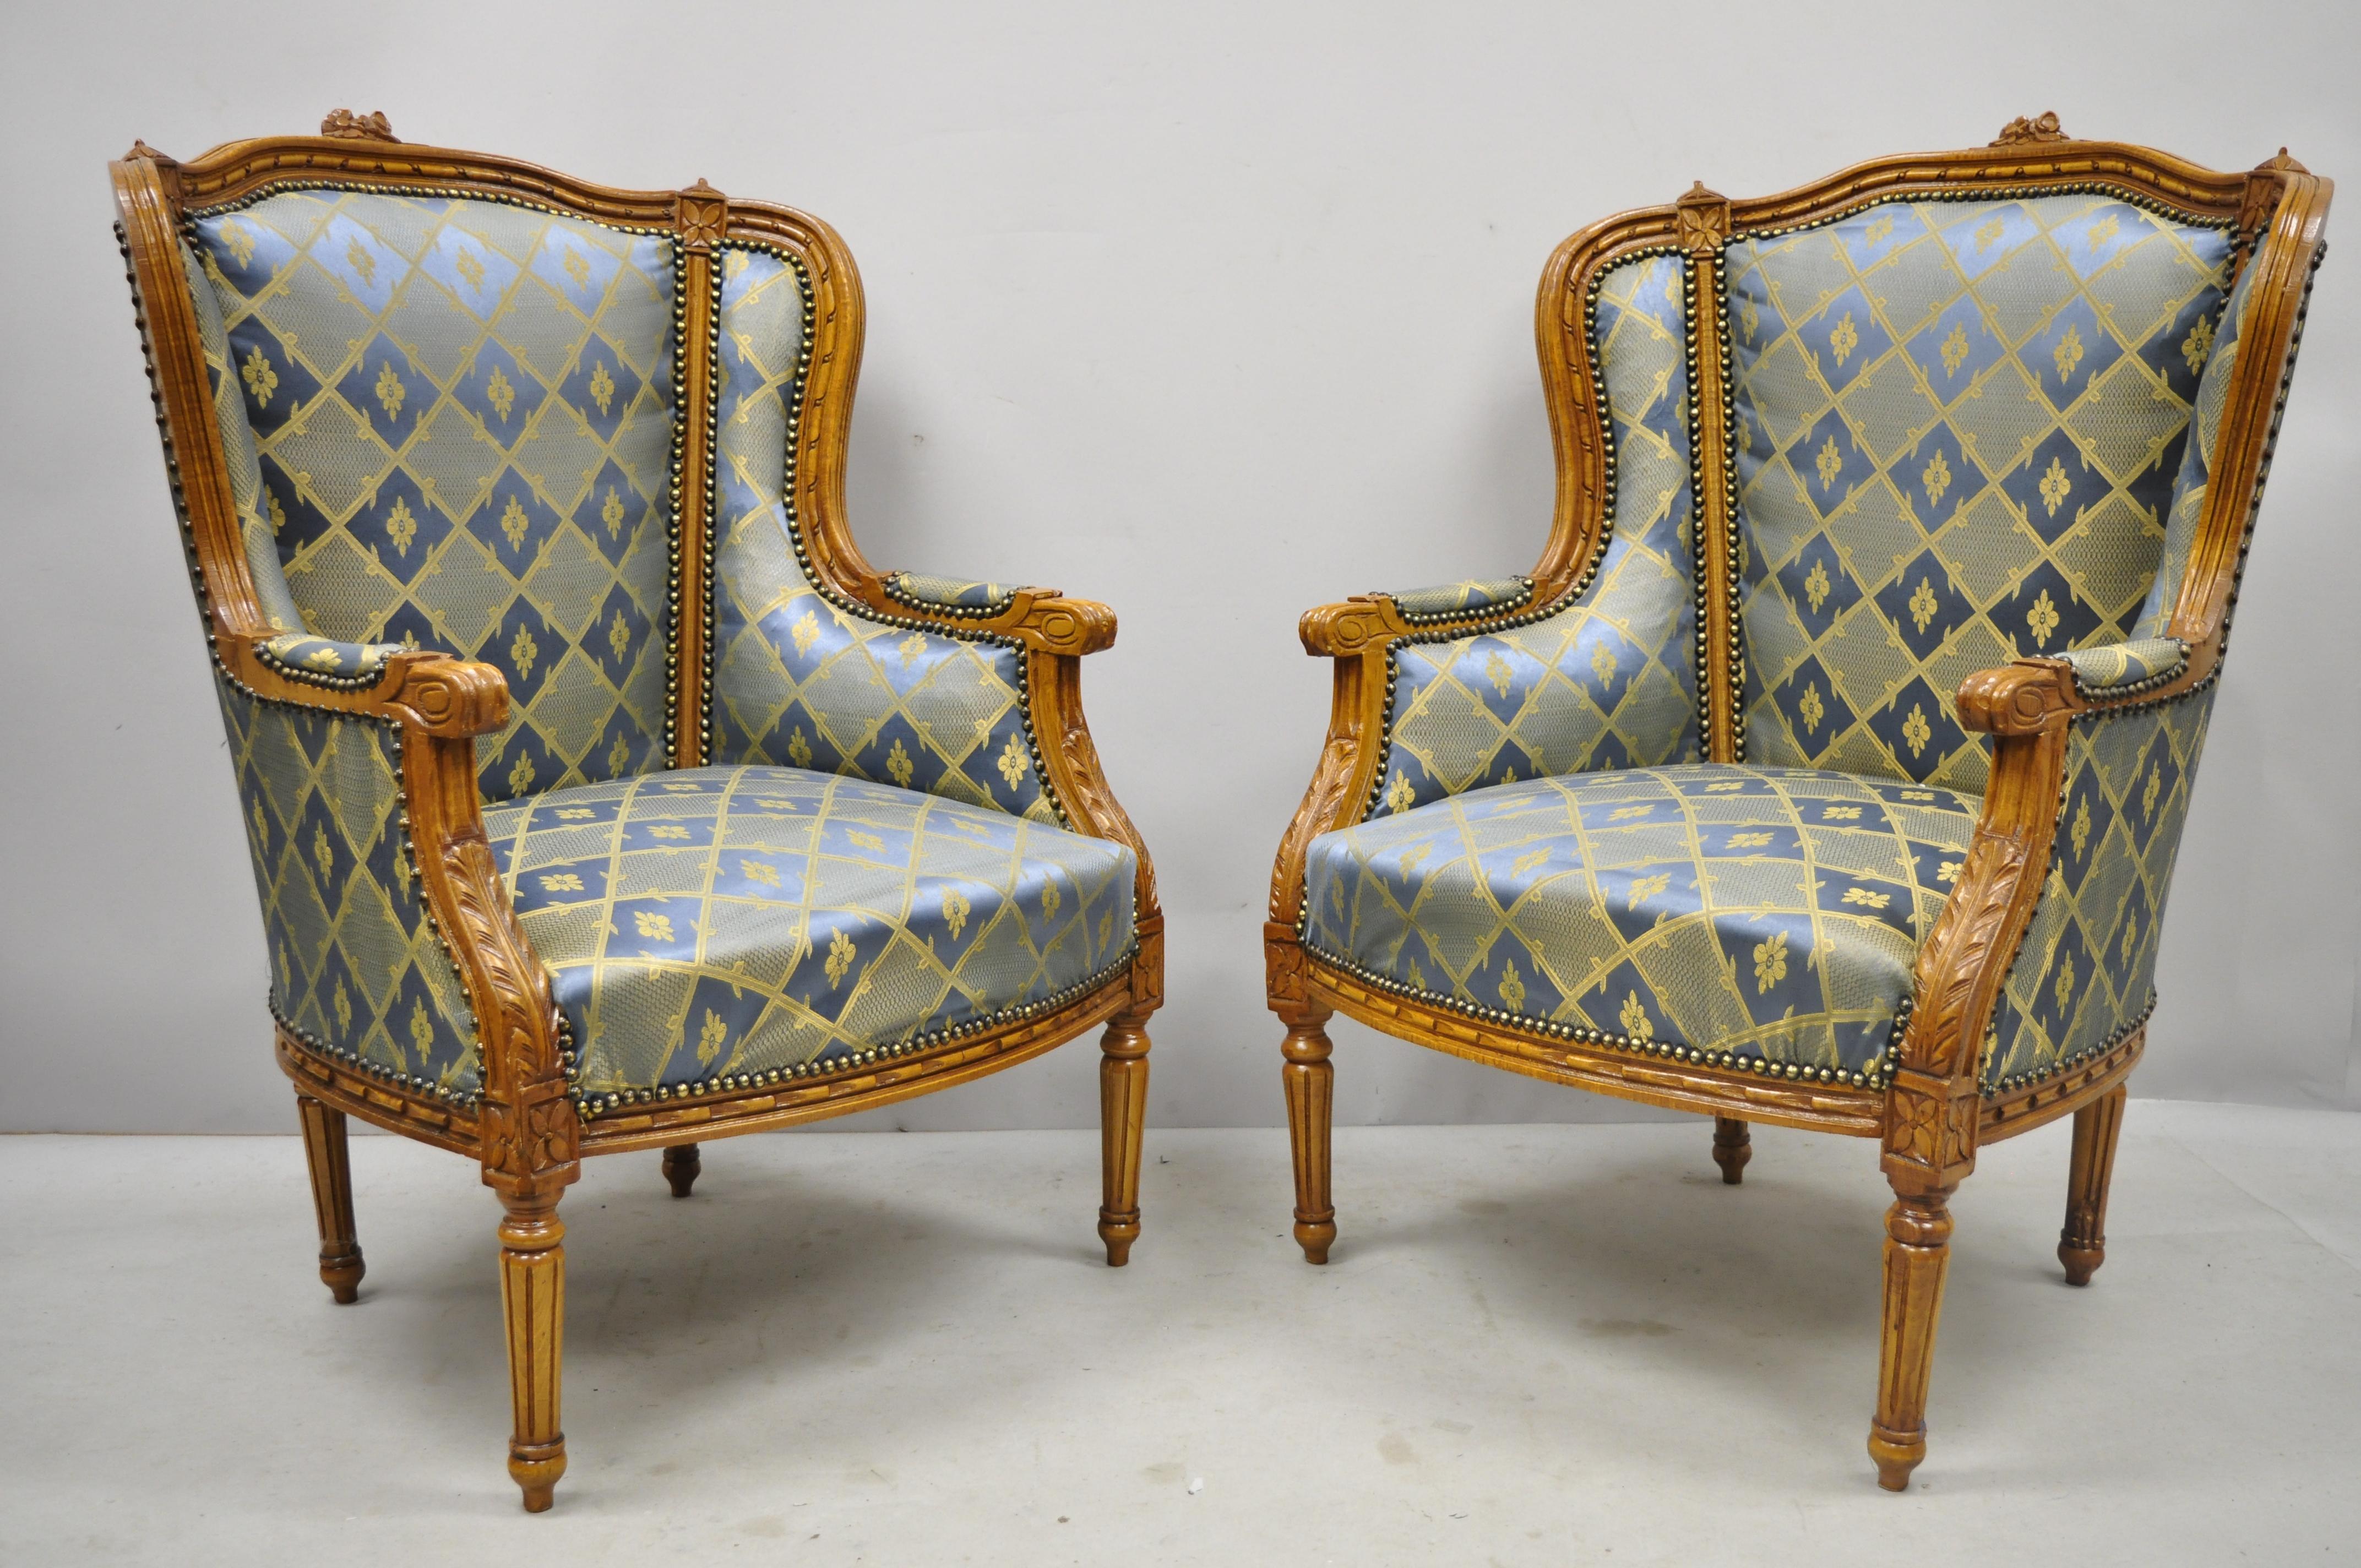 Pair of Louis XVI French style upholstered wingback bergere lounge armchairs blue gold. Listing includes a solid wood frame, upholstered armrests, nicely carved details, cabriole legs, great style and form, circa late 20th century. Measurements: